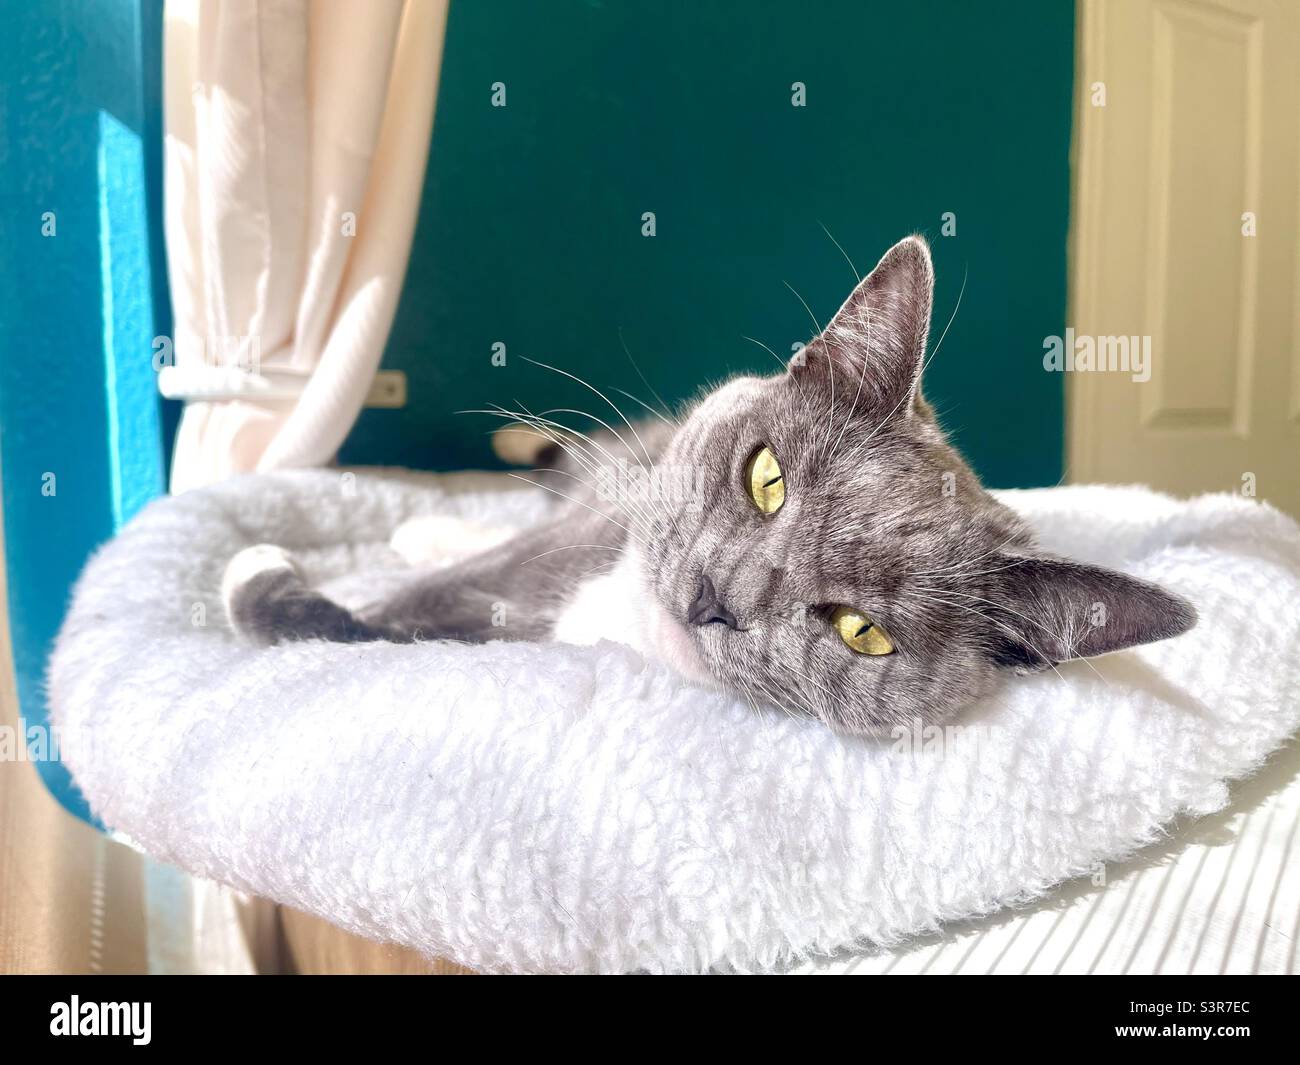 Striking gray and white cat with gold green eyes laying in window on soft bed, shadow lines across face, blue green wall in background Stock Photo